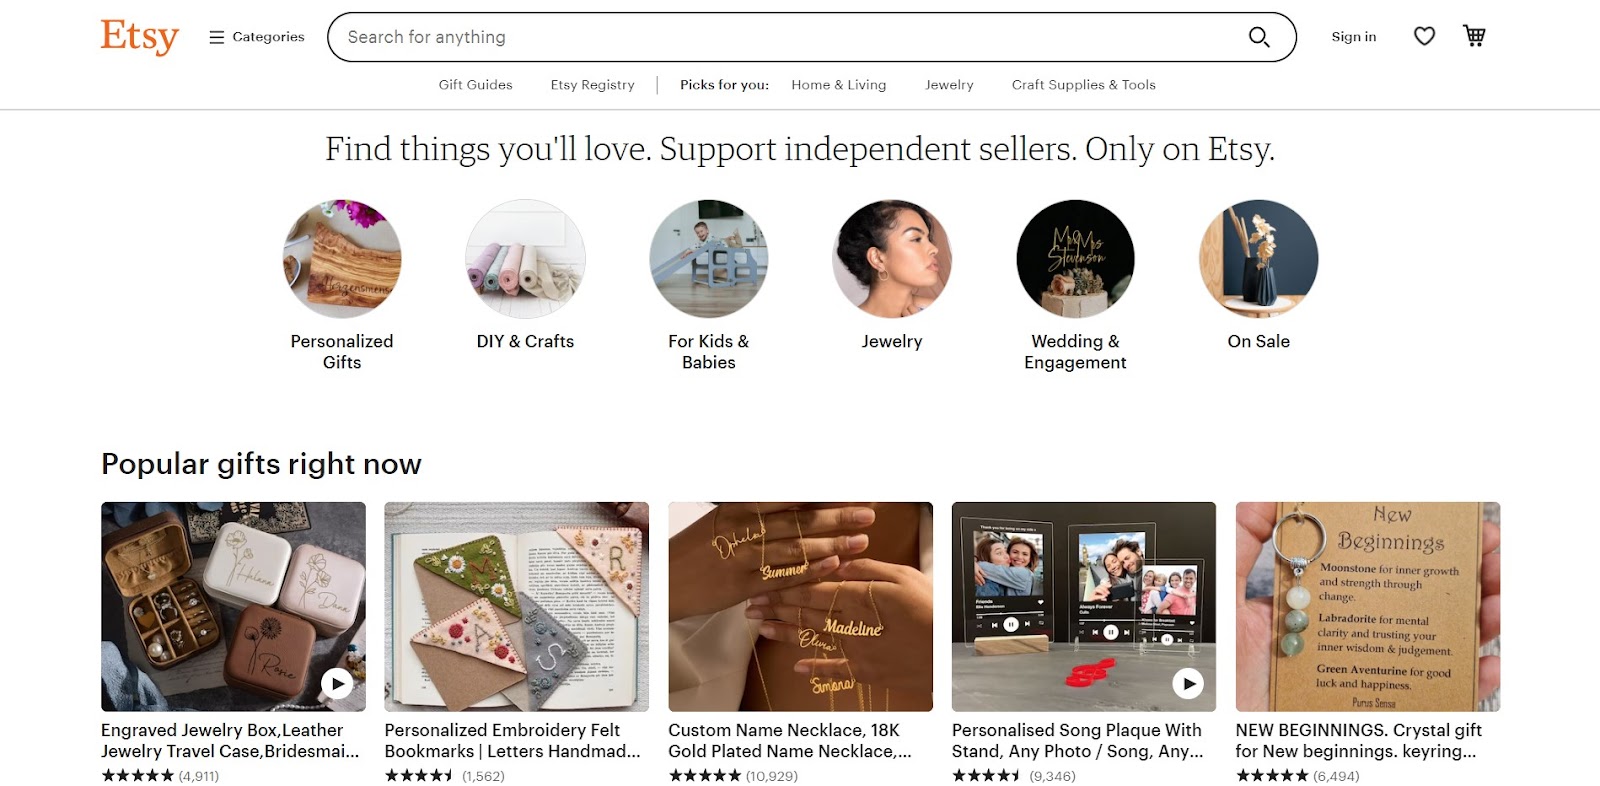 Etsy- one of the most scraped websites